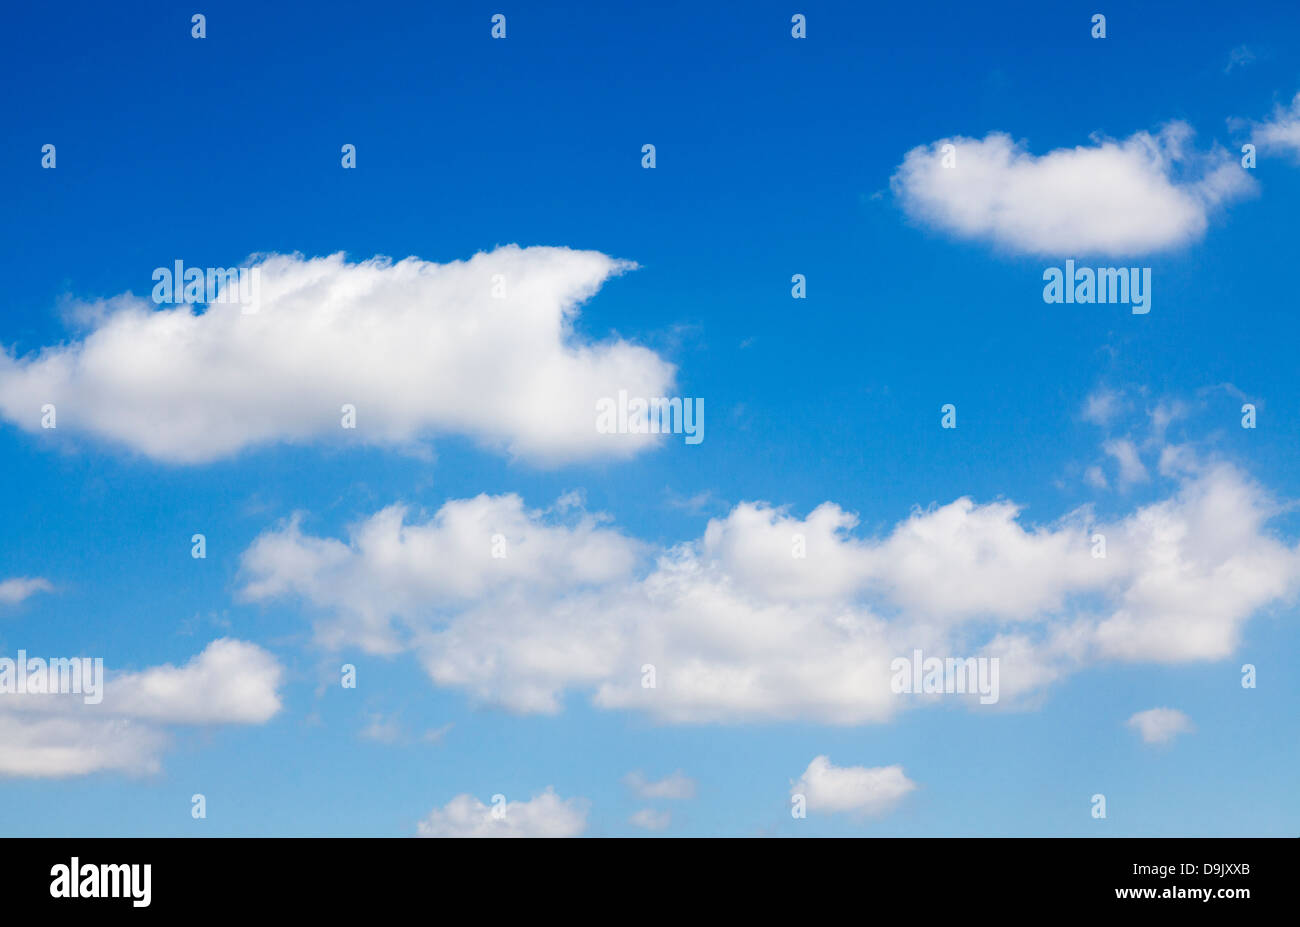 White fluffy clouds in a blue sky Stock Photo